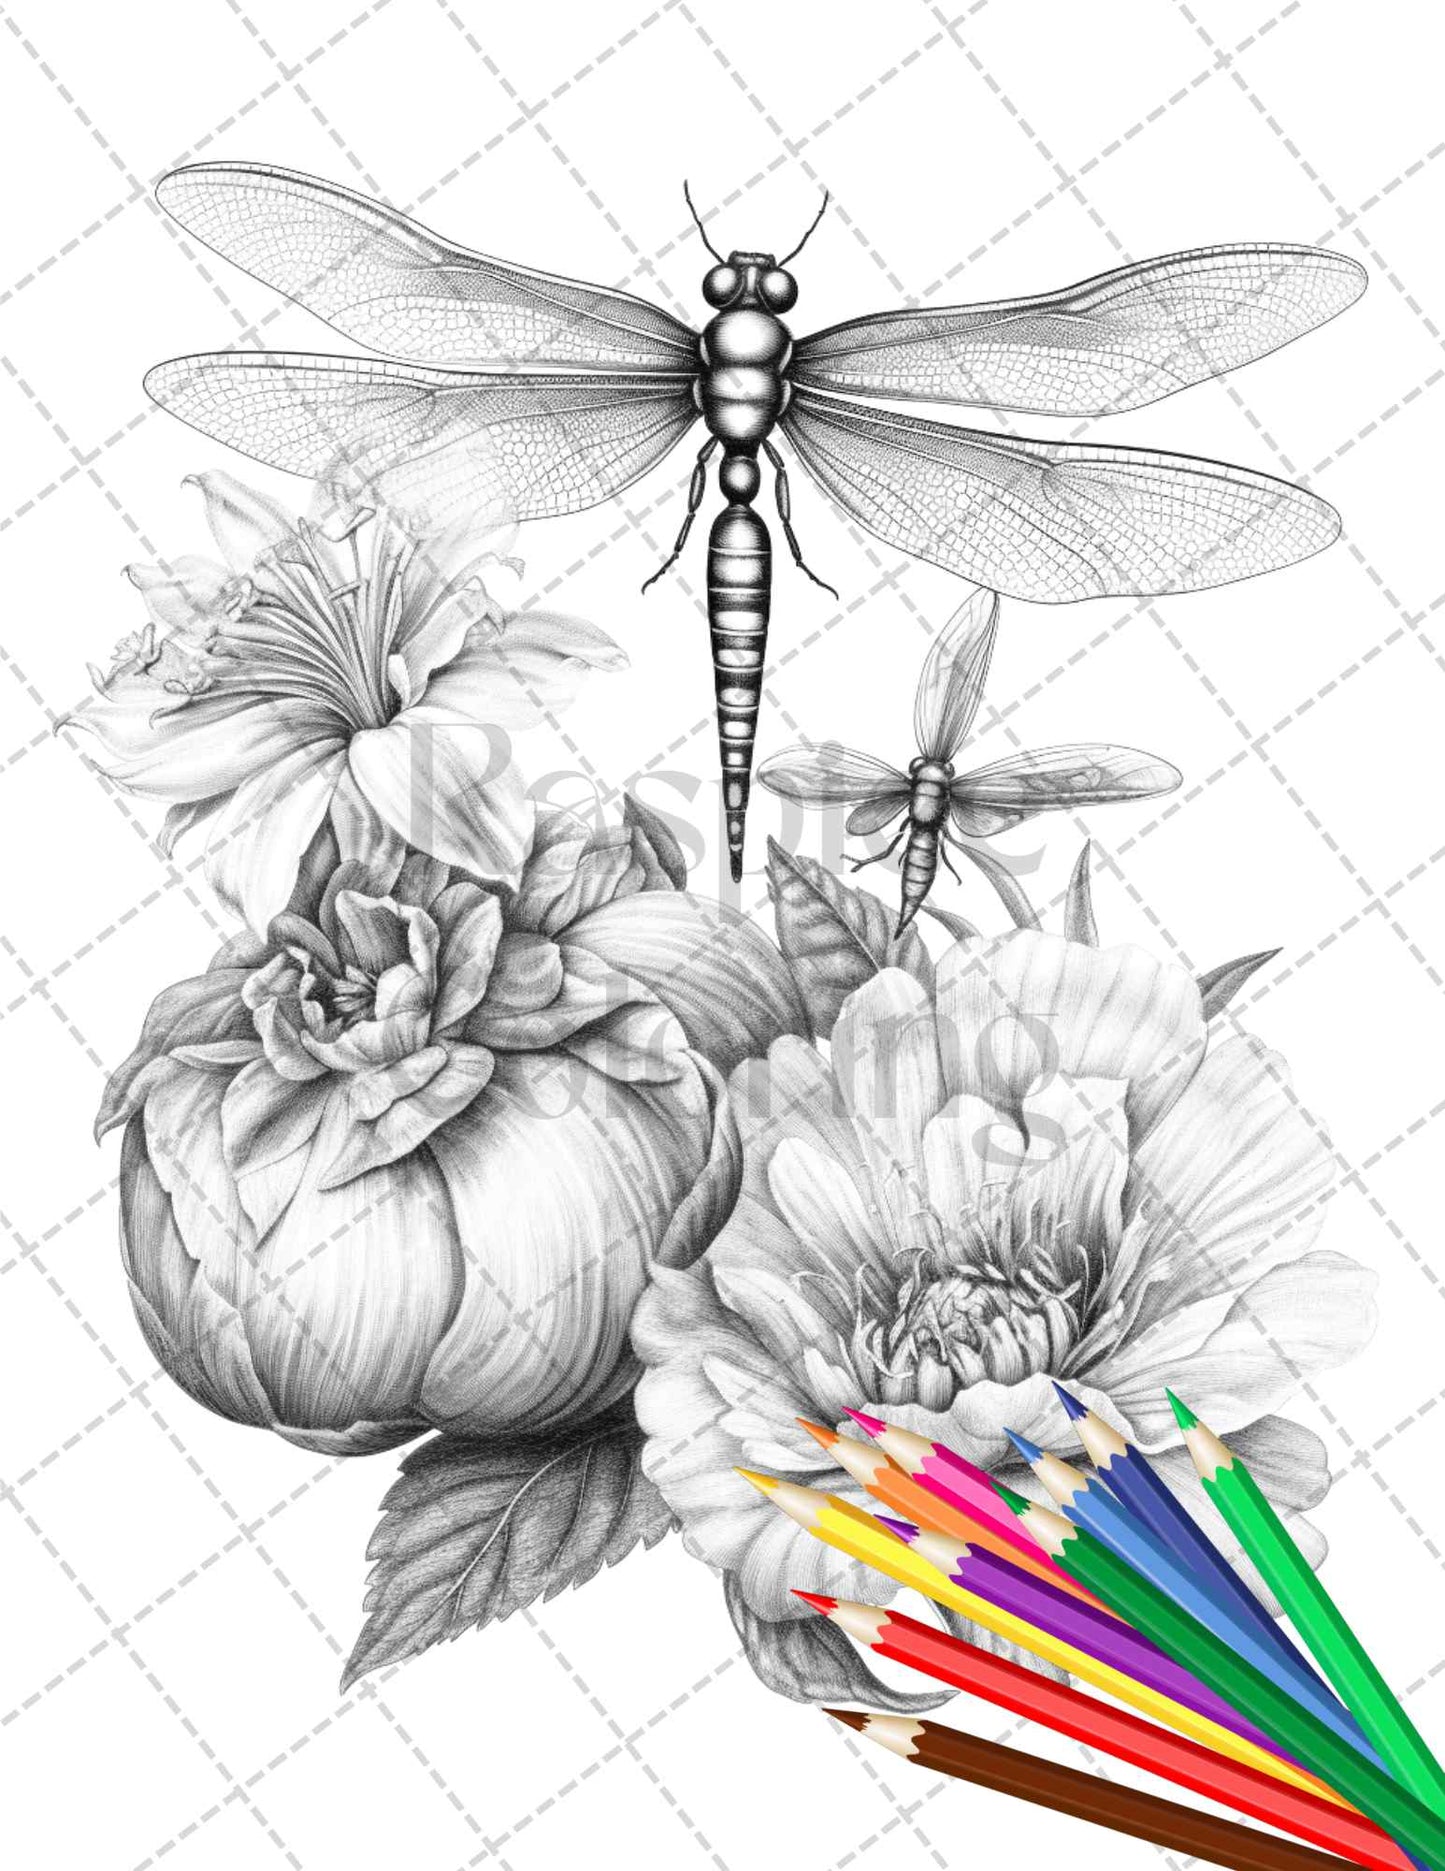 Vintage Botanical Dragonfly Grayscale Coloring Pages Printable, Adult Coloring Book, Relaxation Art, Printable Grayscale Coloring Sheets for Adults